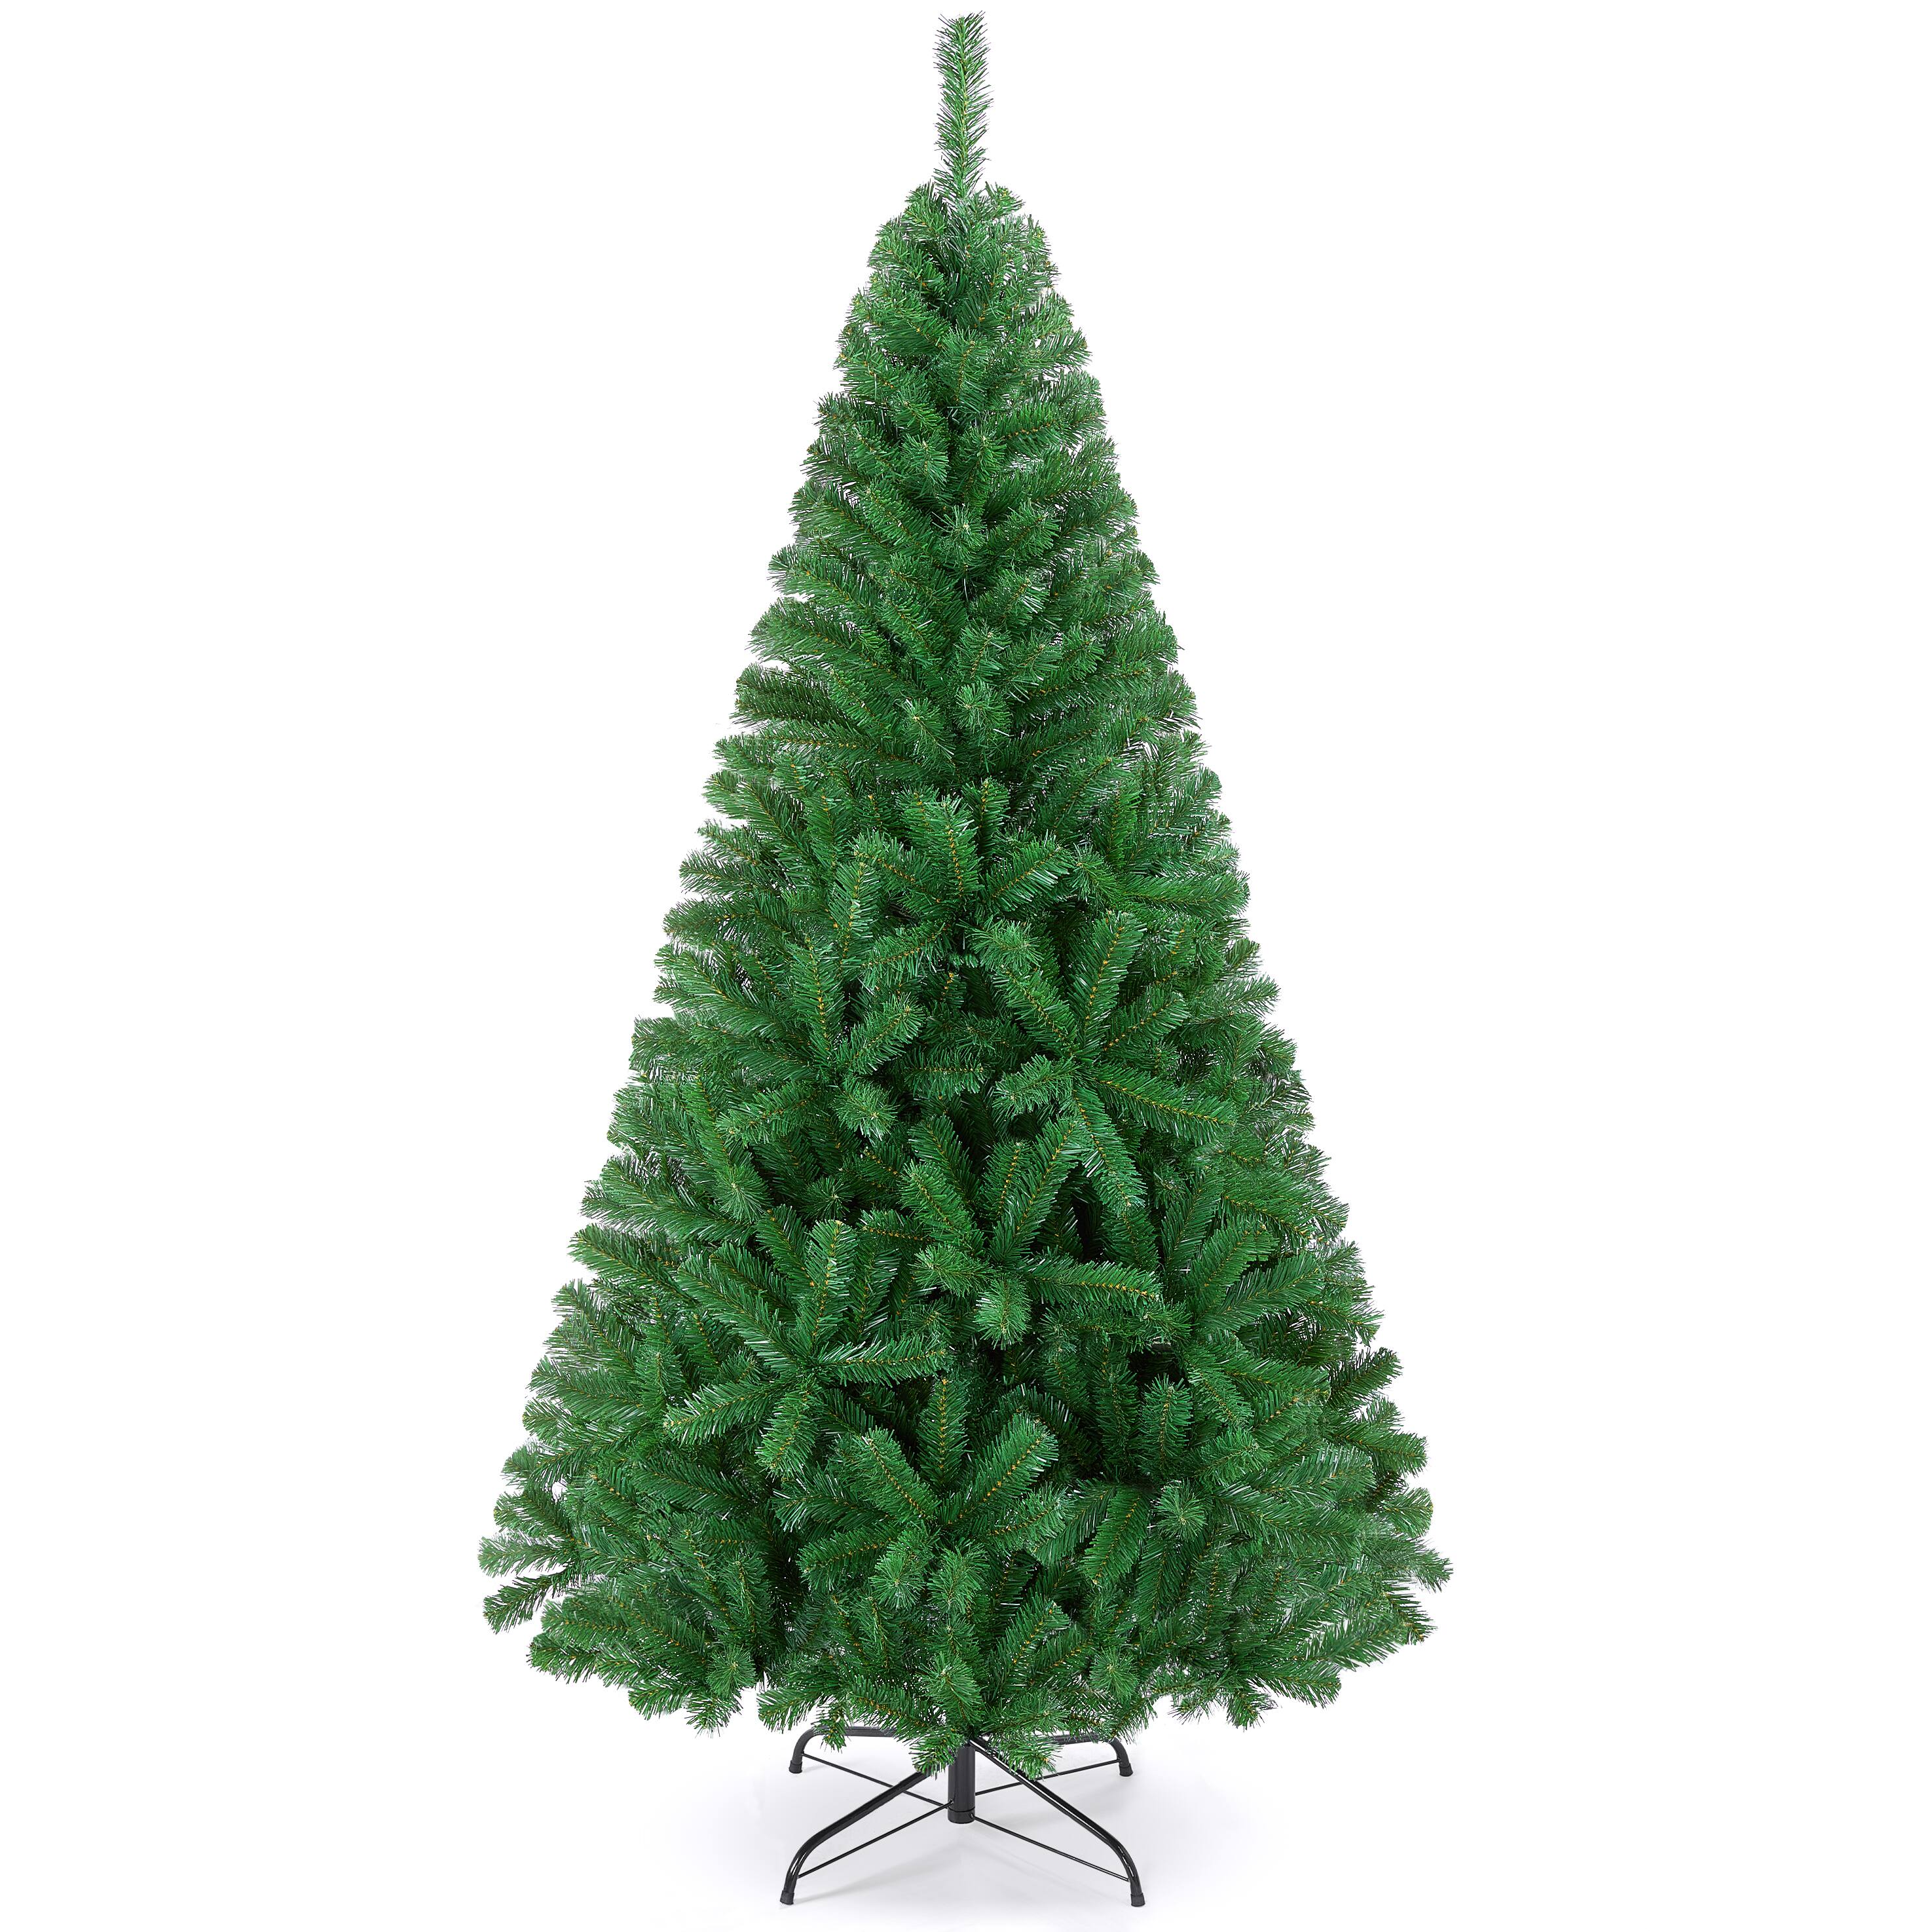 YAHEETECH 6FT Unlit Green Lifelike Christmas Pine Tree Holiday Decoration with 714 Branch Tips and Foldable Stand $37.99 AC + FSSS